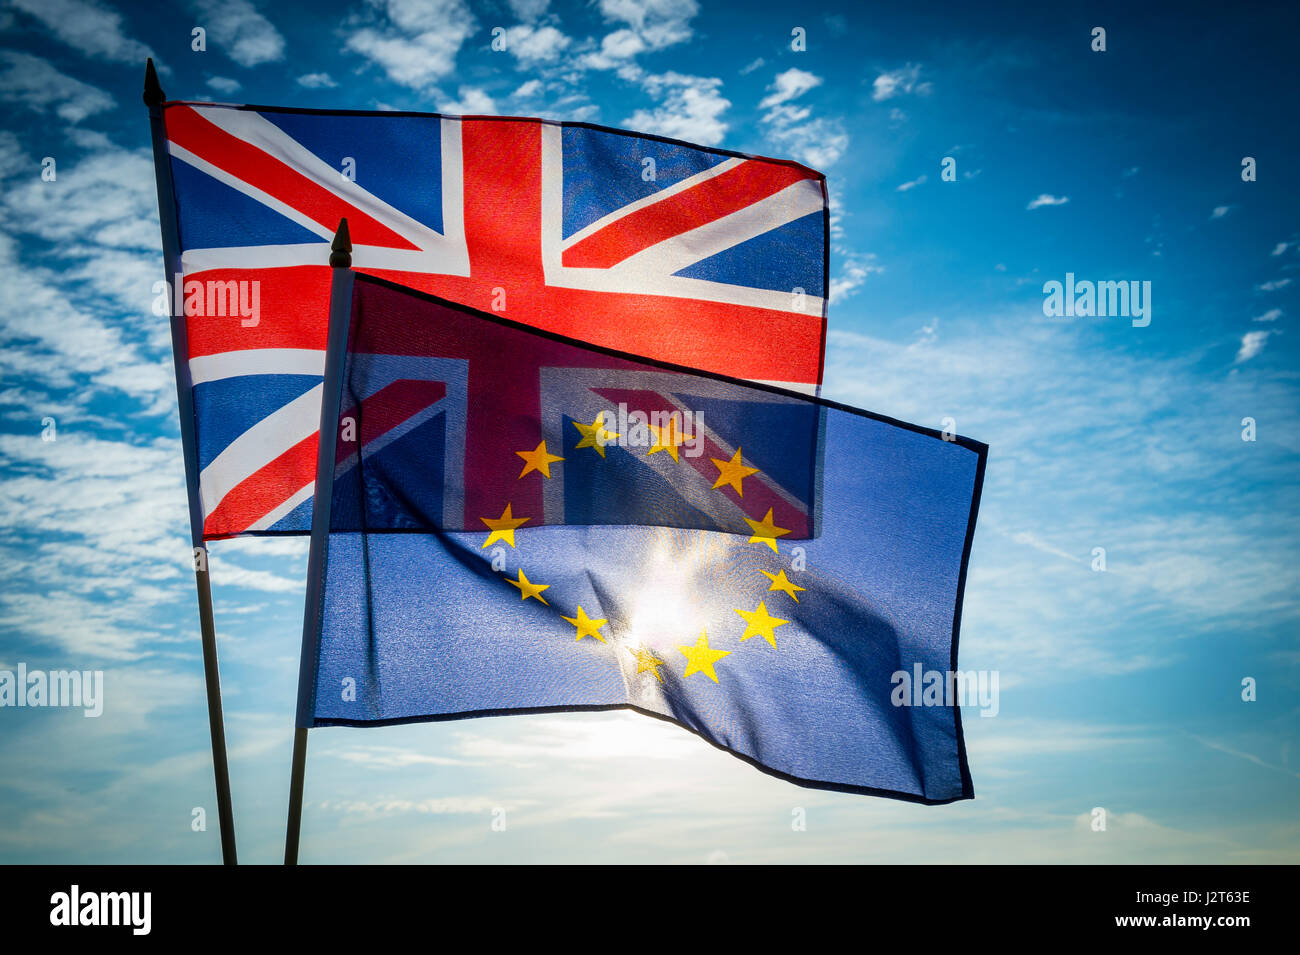 EU European Union and UK United Kingdom flags flying together in bright blue sky on the dawn of a new day of cooperation Stock Photo